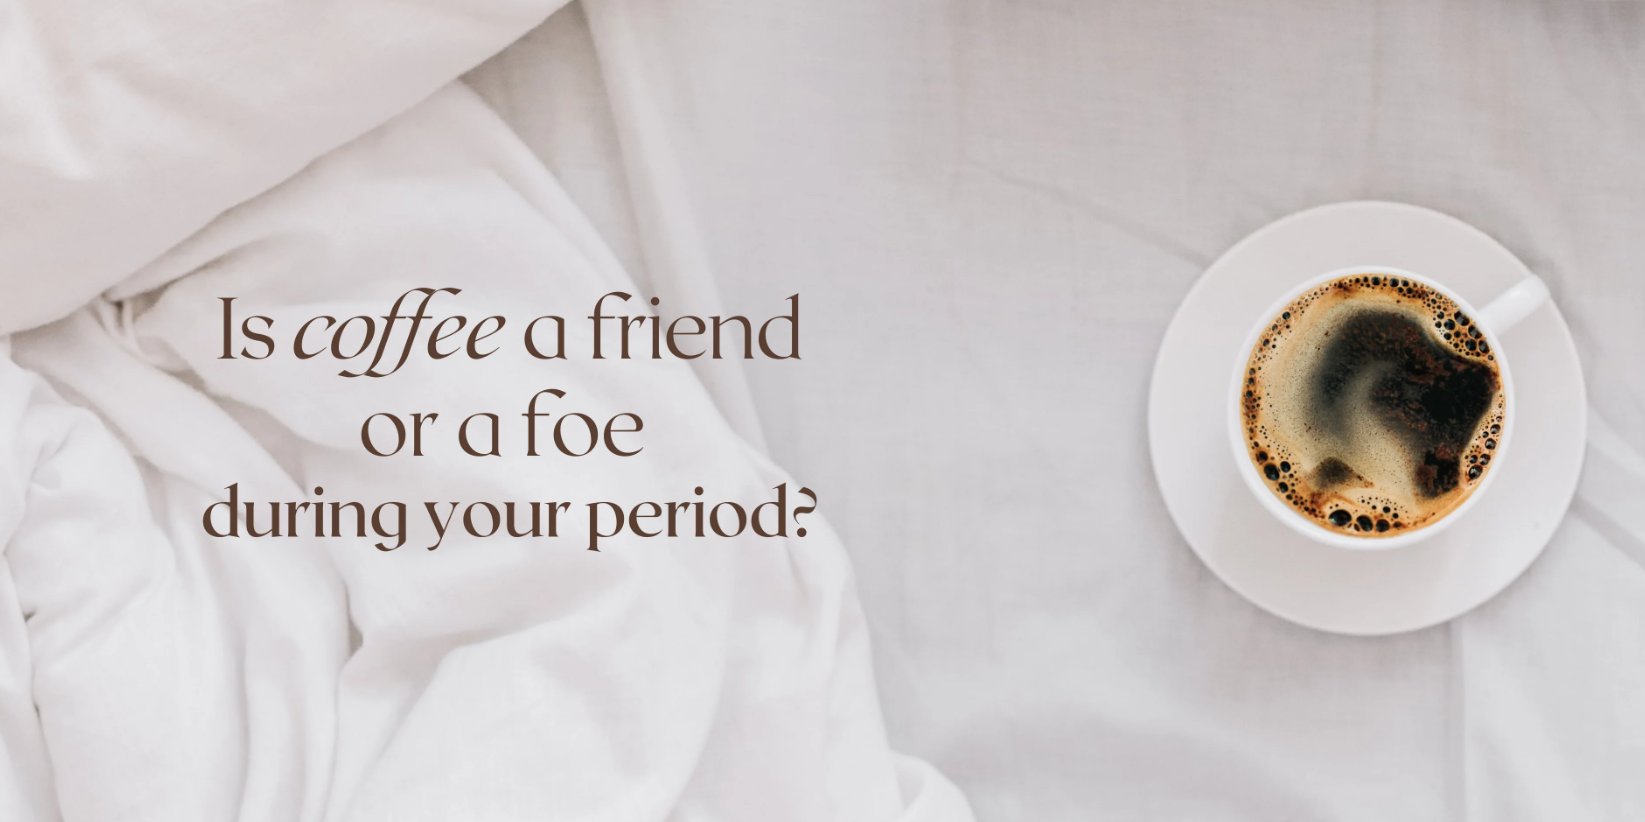 Coffee Craving During Your Period? Friend or Foe? FAQs Included!